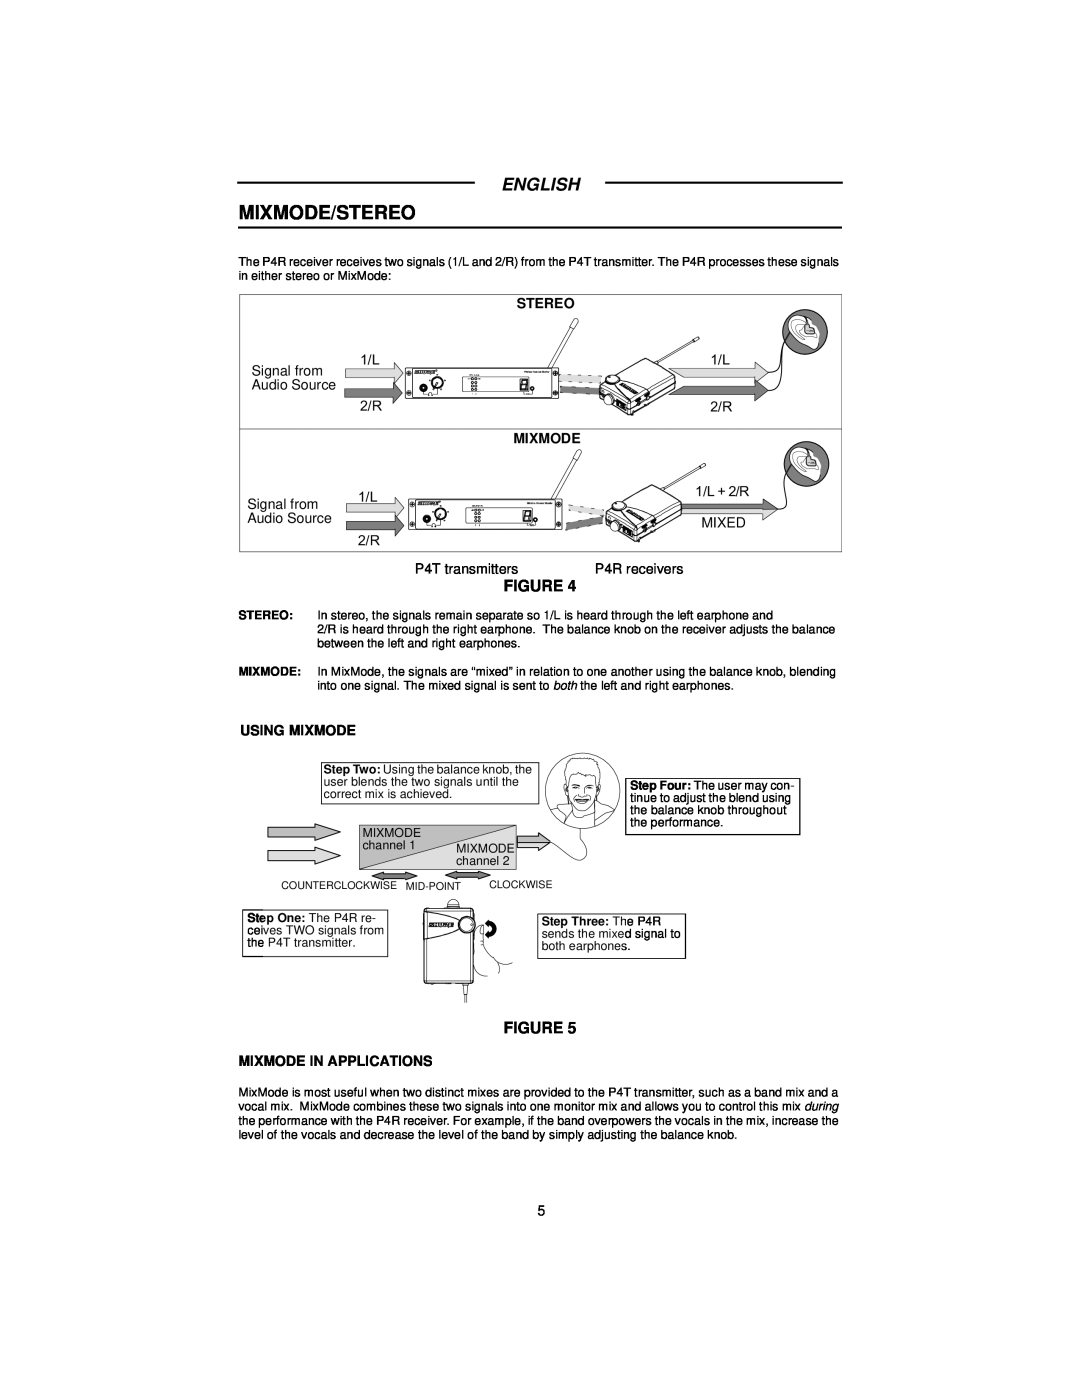 Shure P4R manual Mixmode/Stereo, English, Using Mixmode, Mixmode In Applications 